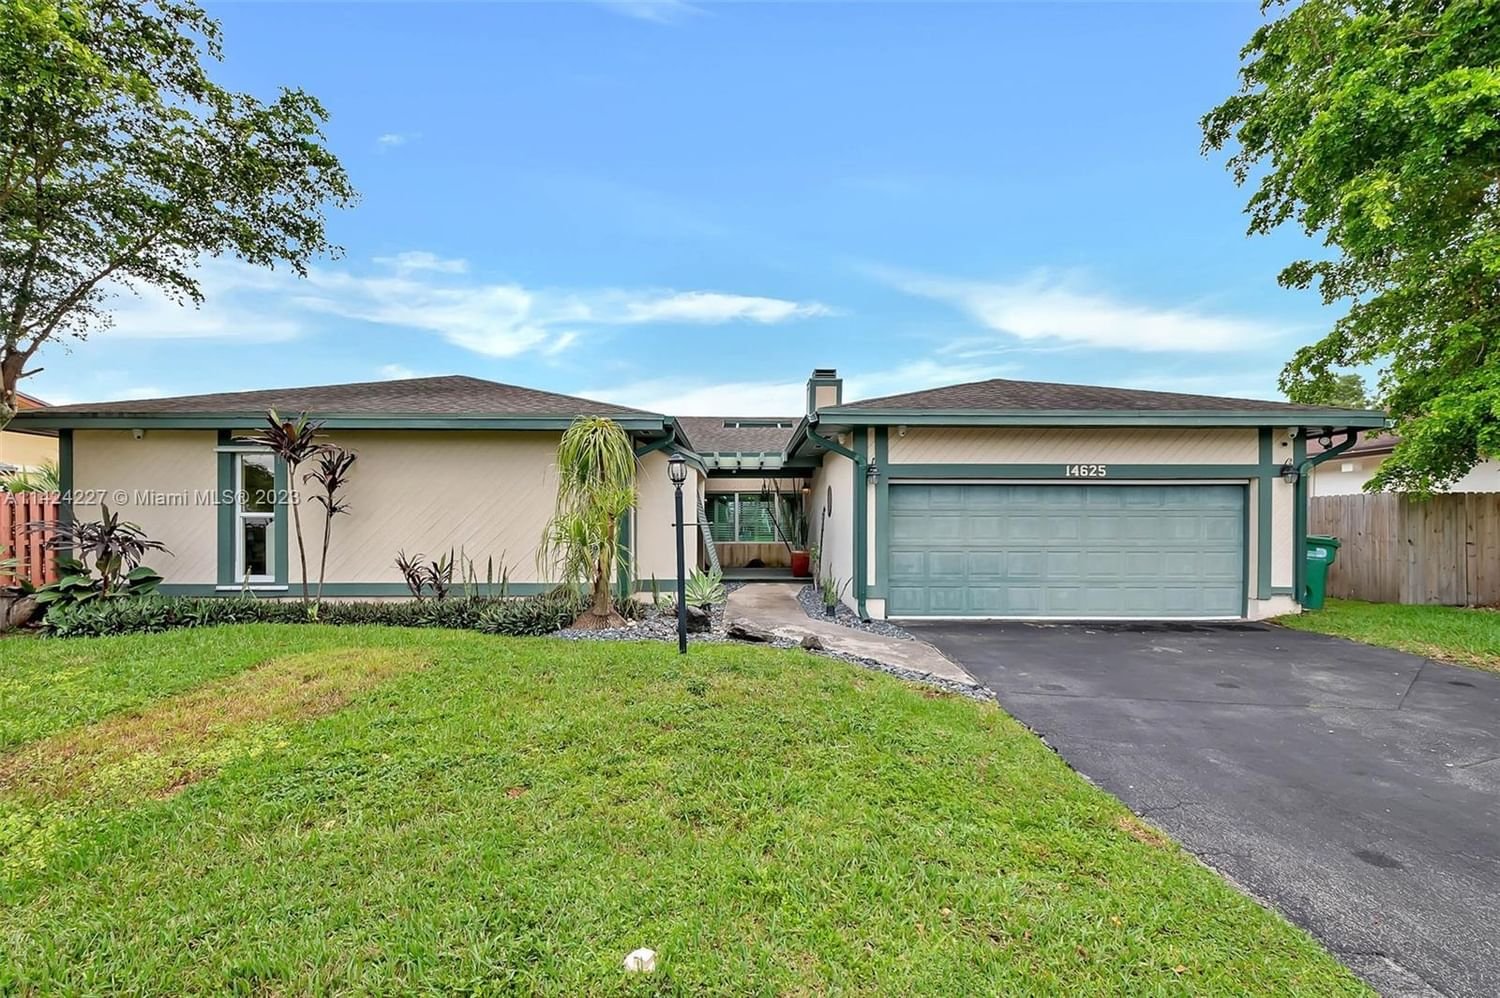 Real estate property located at 14625 63rd Ter, Miami-Dade County, Miami, FL